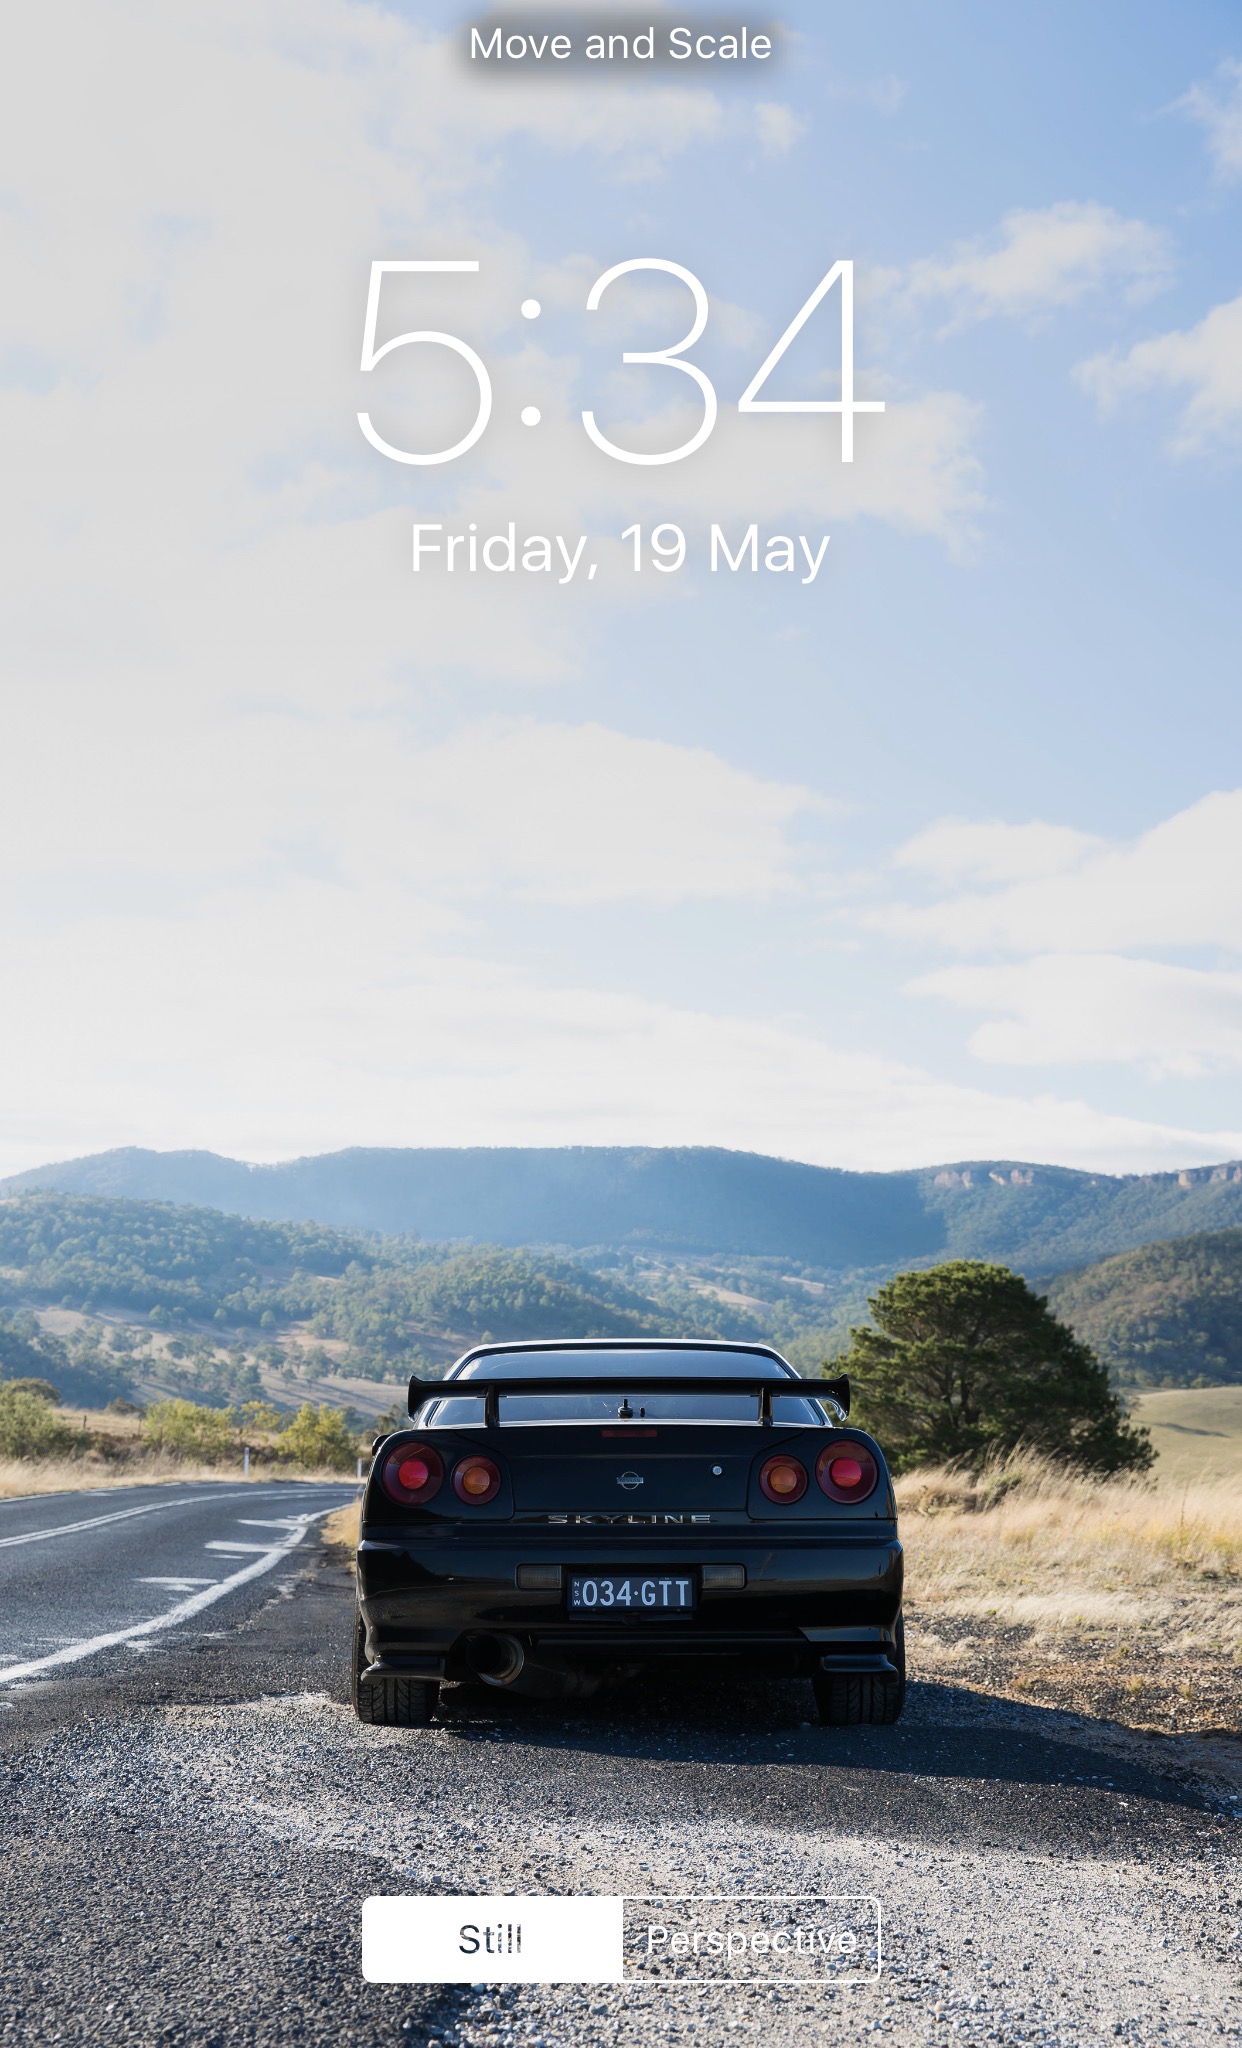 Free R34 Iphone Wallpapers Stay Driven